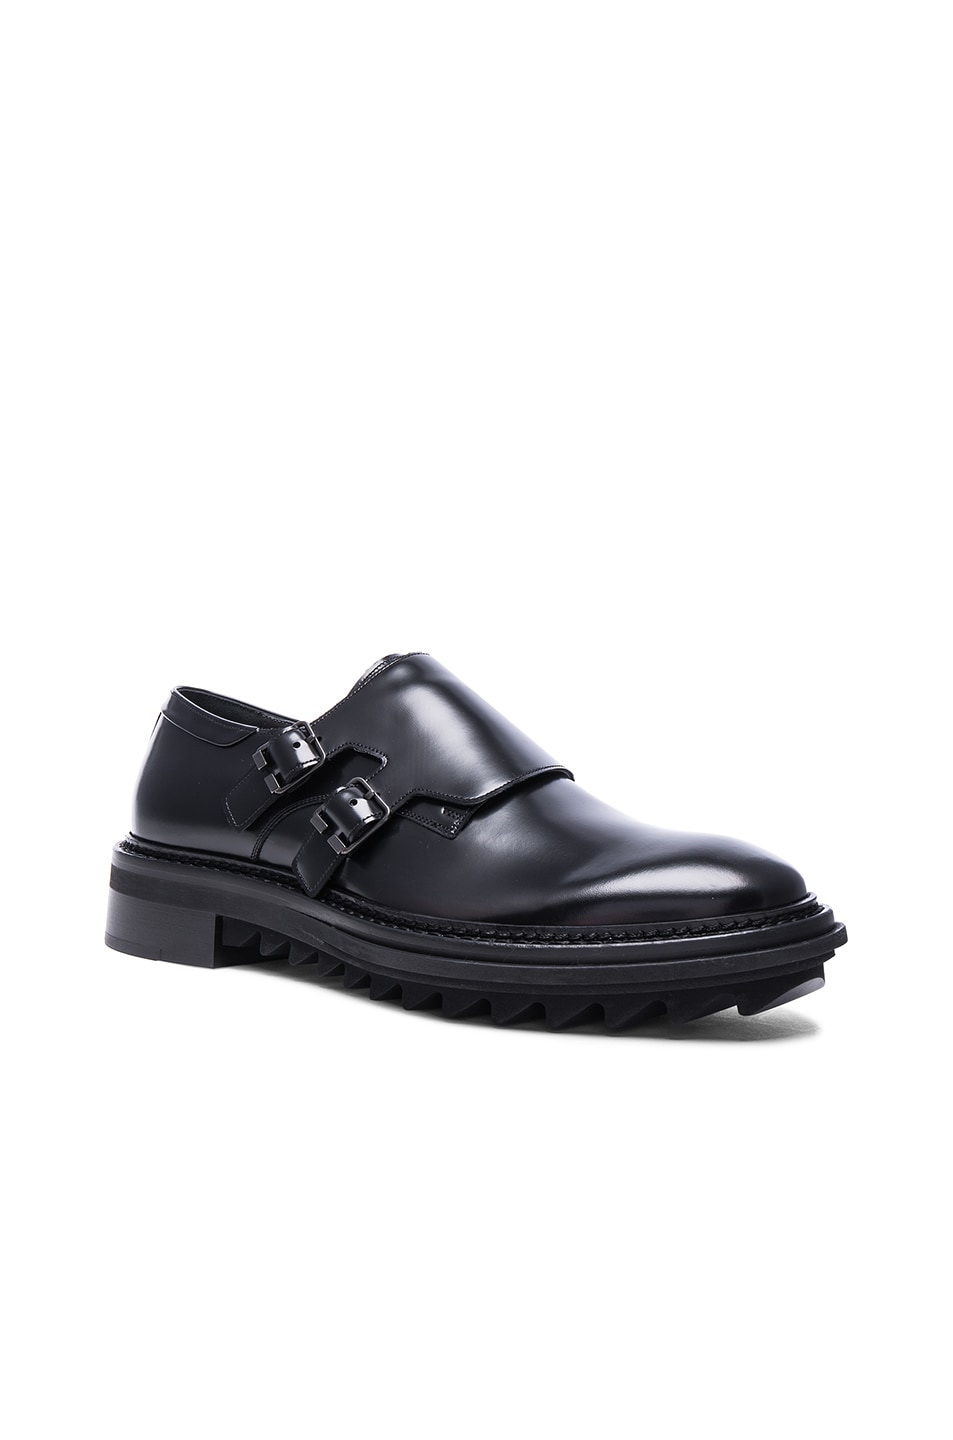 Image 1 of Lanvin Glossy Calfskin Leather Monk Shoes in Black